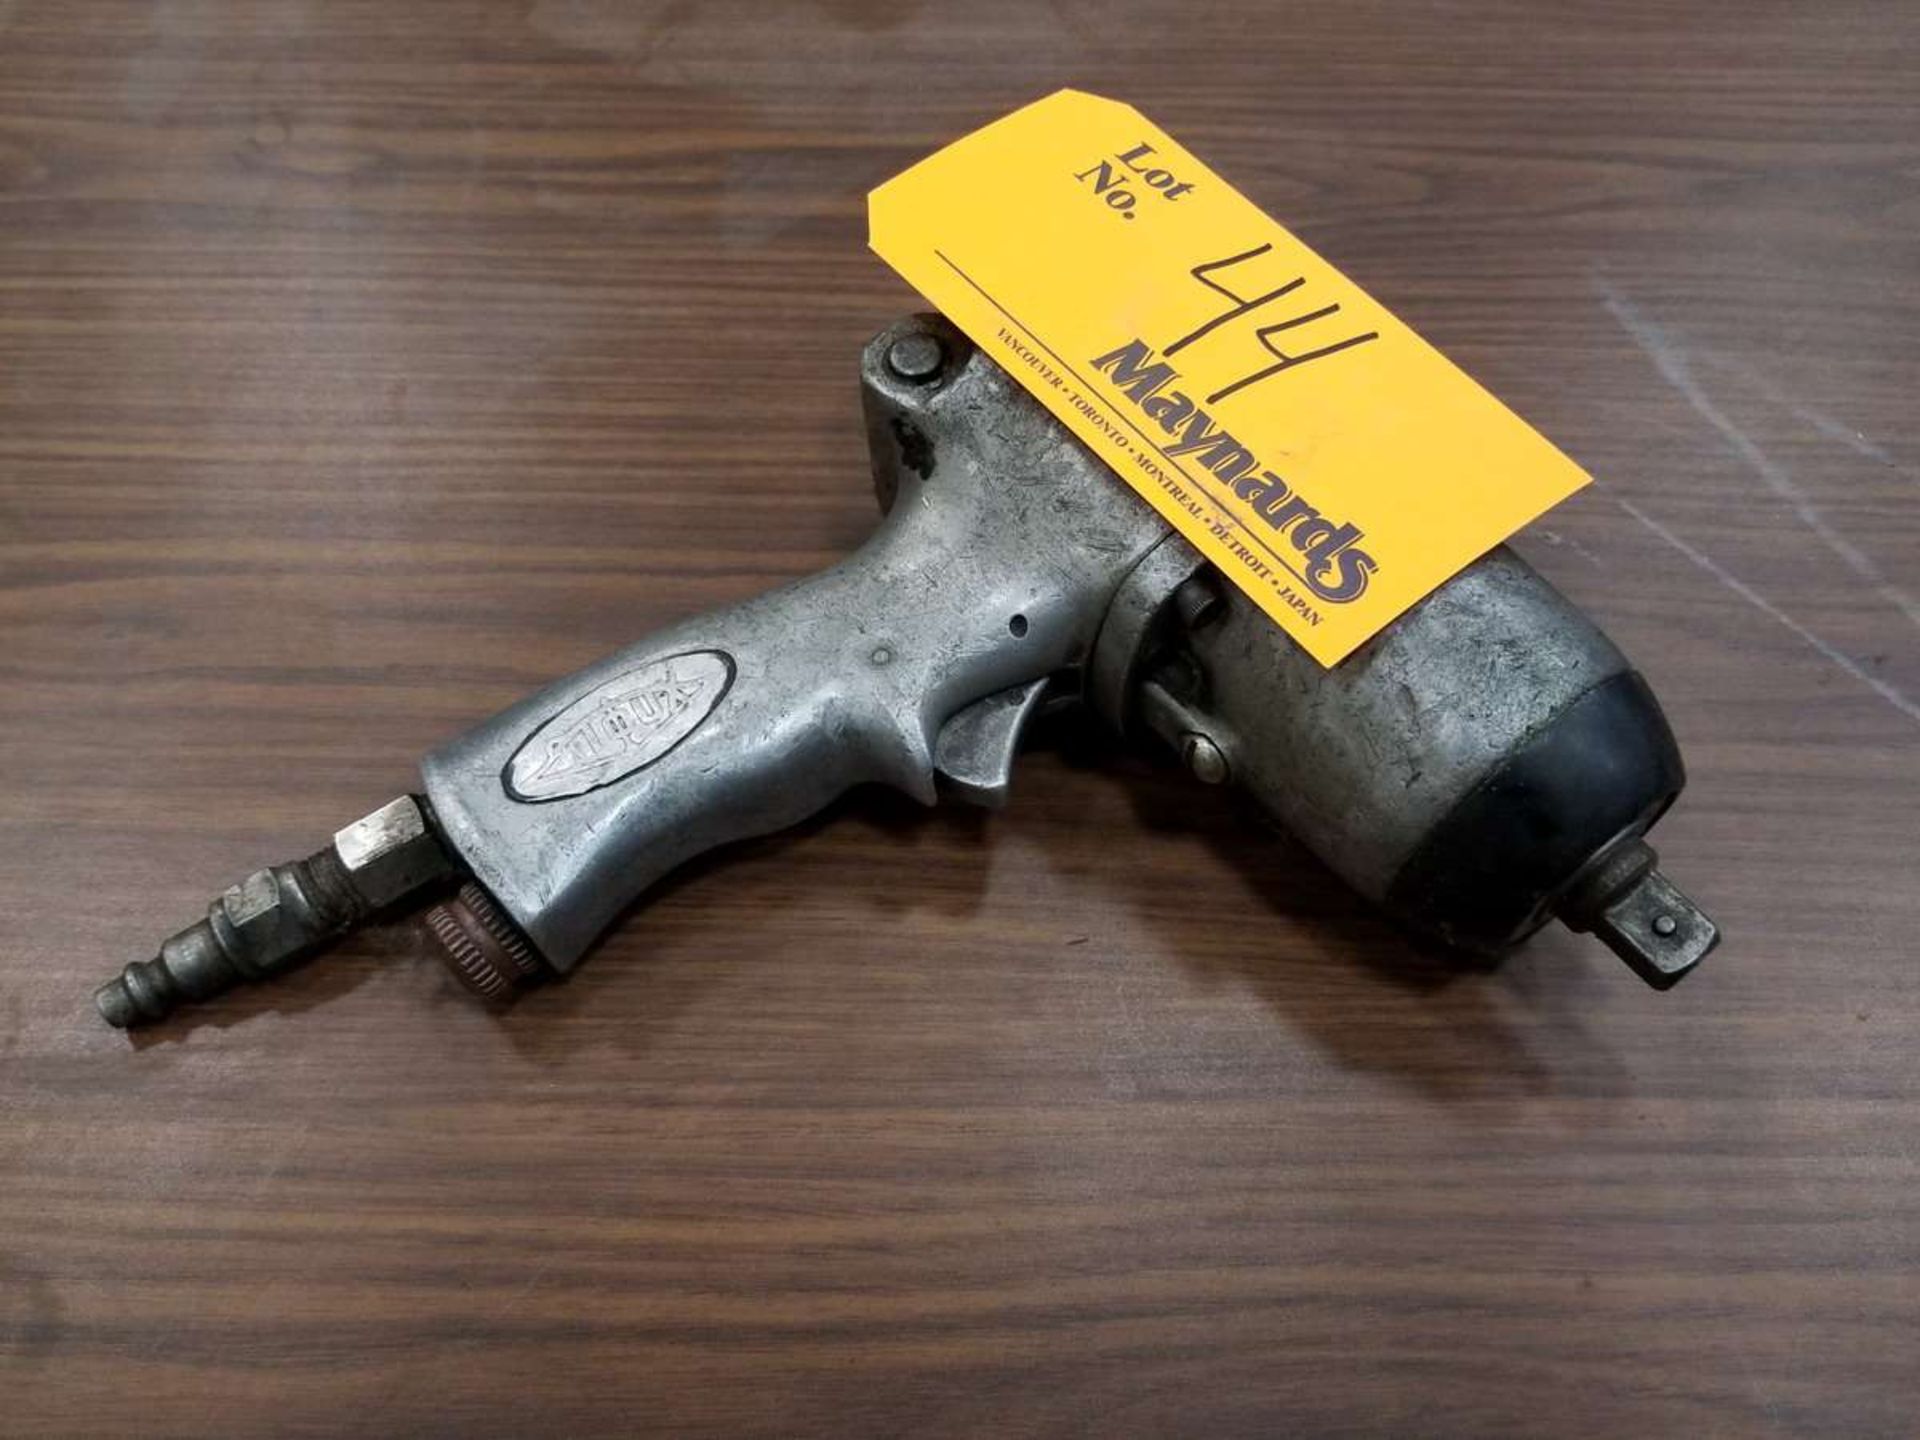 Siox 1/2" Pneumatic Impact Wrench.